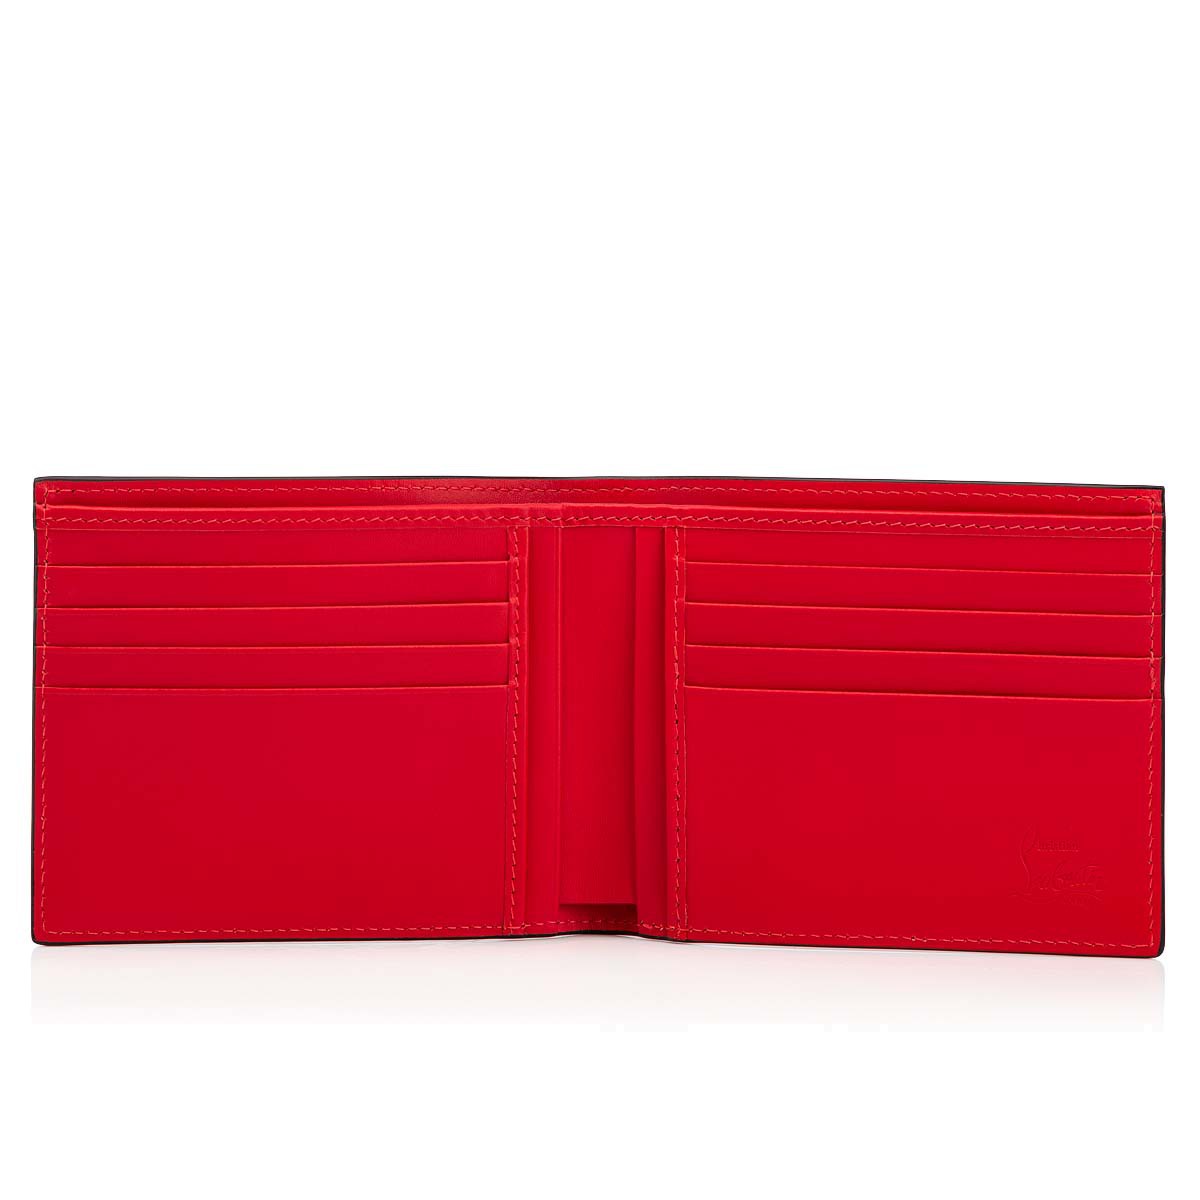 Small Leather Goods - Coolcard - Christian Louboutin